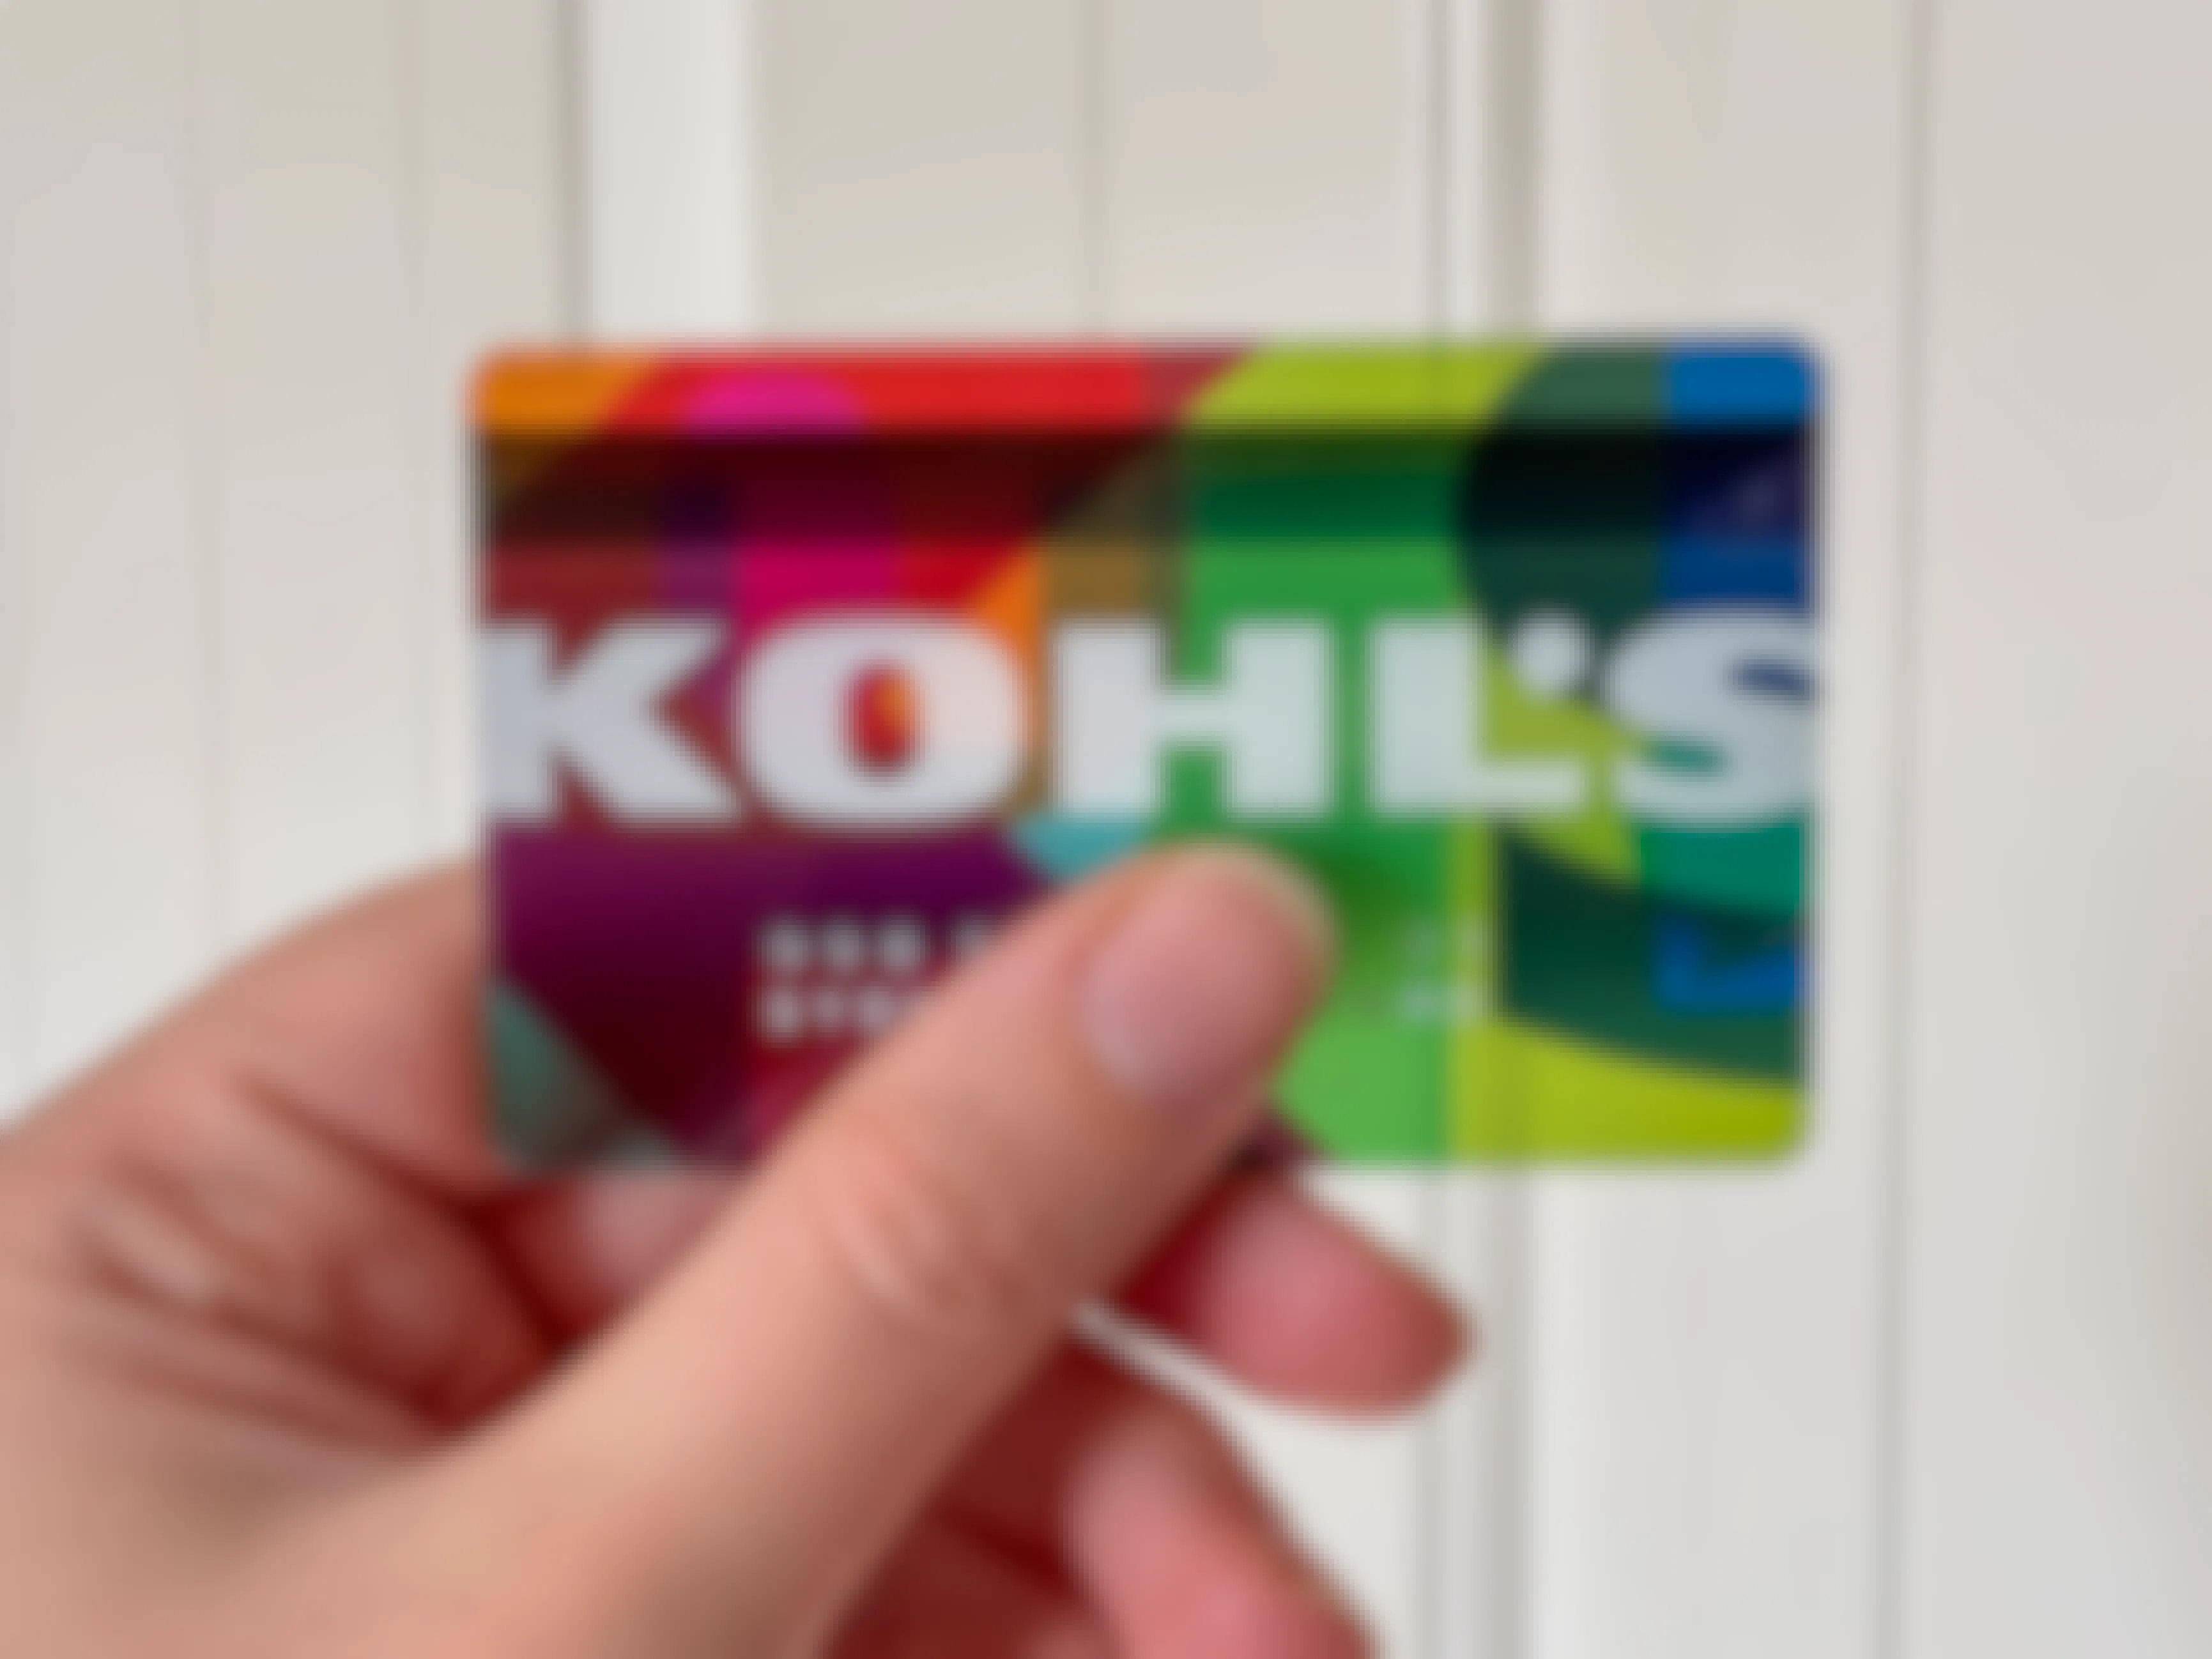 A hand holding a Kohl's credit card.